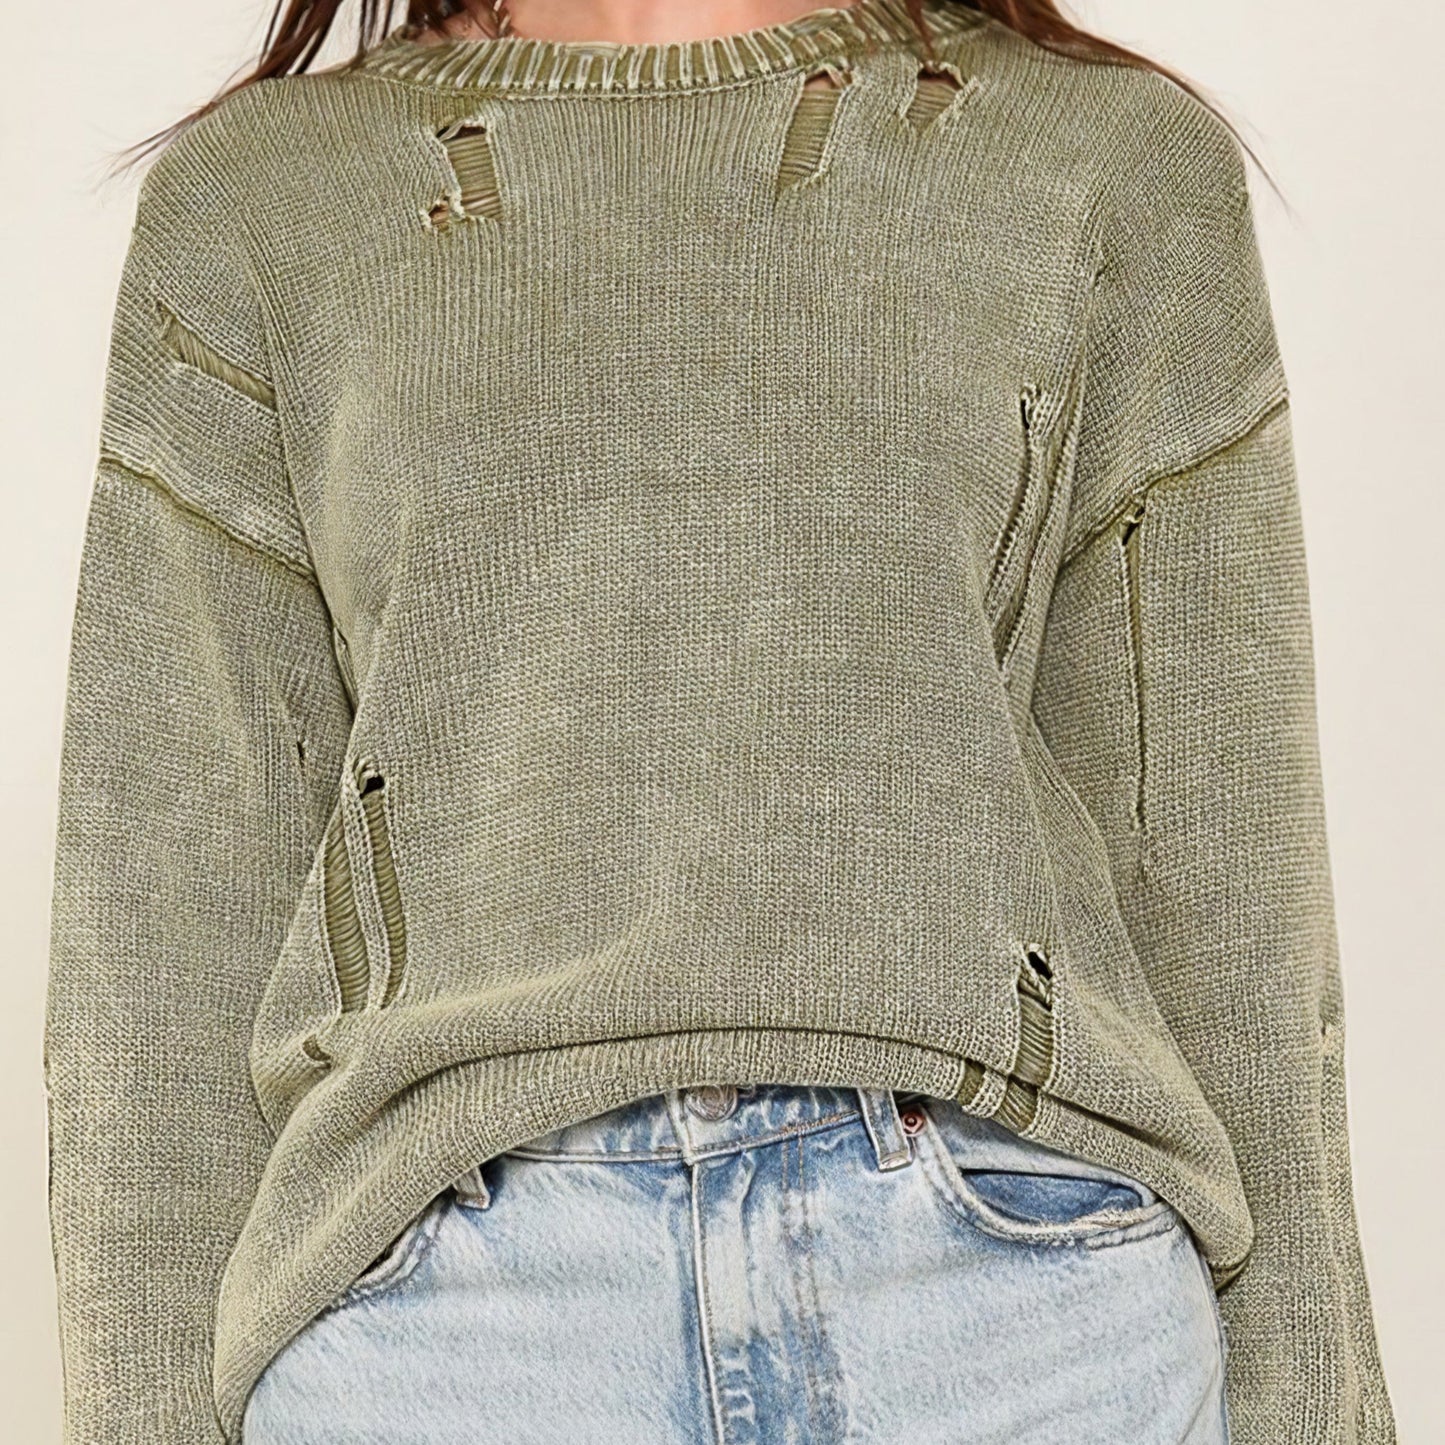 Mineral Wash Distressed Sweater